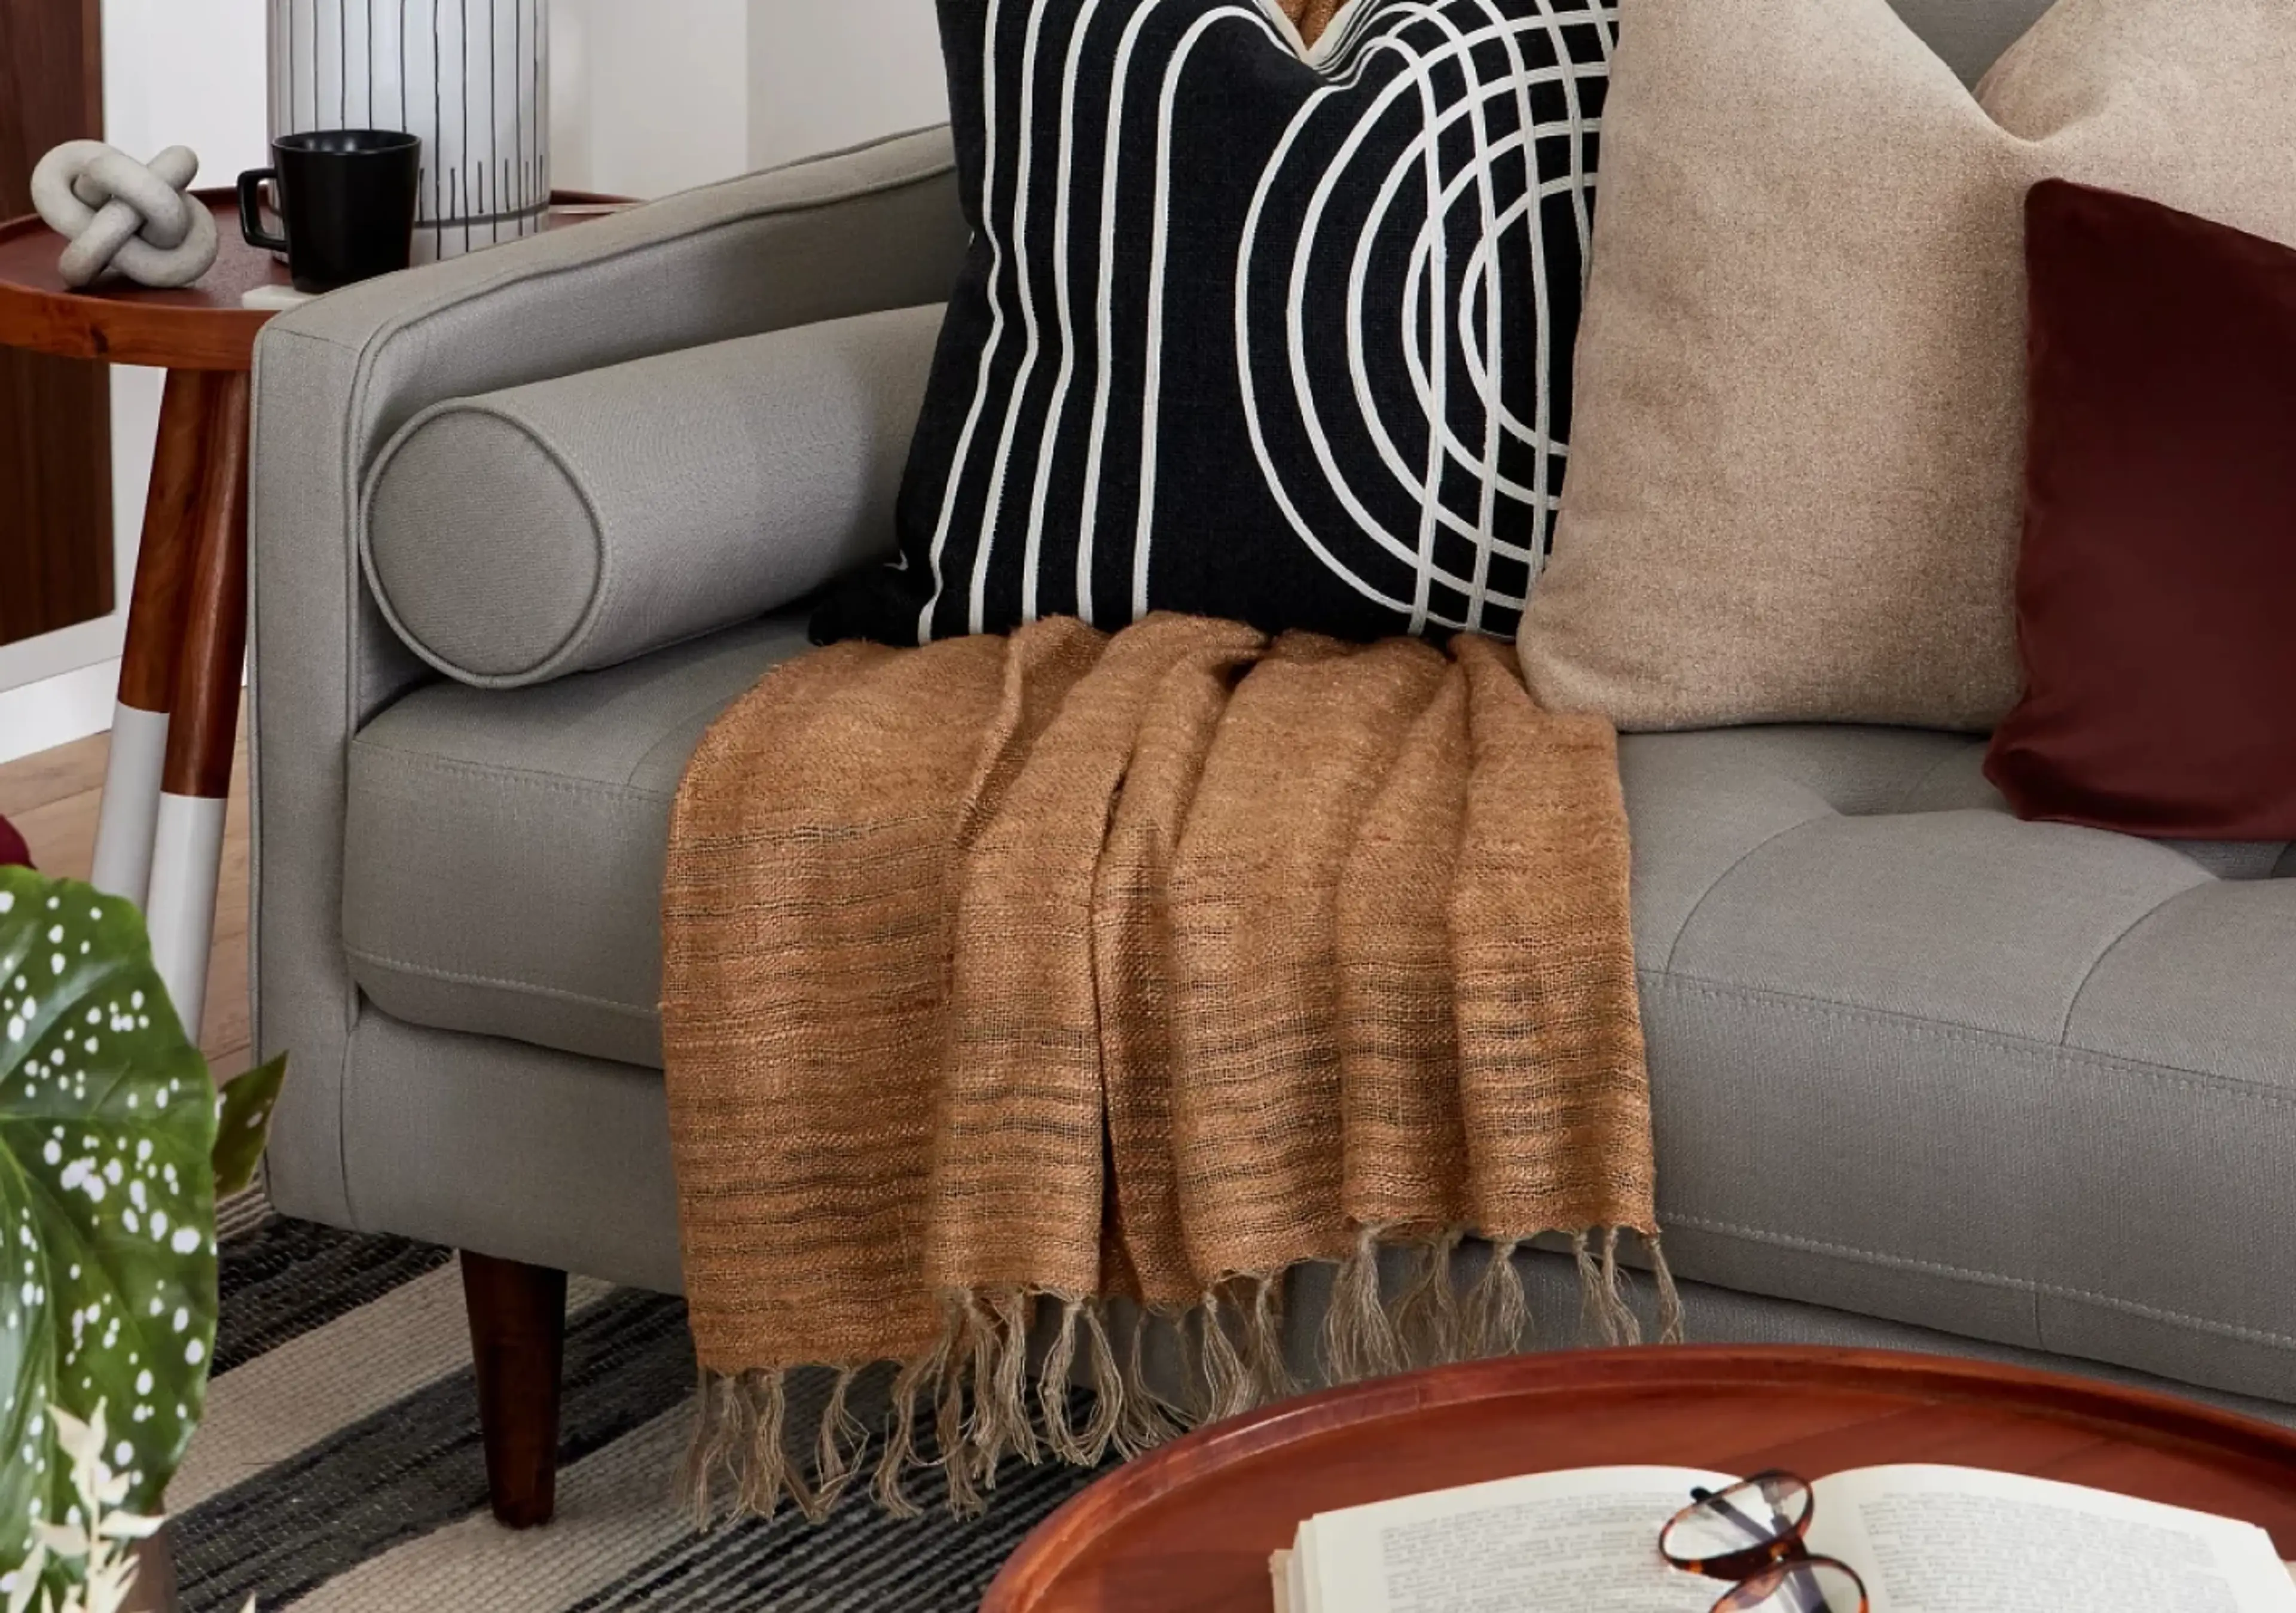 Cozy Up with Throws